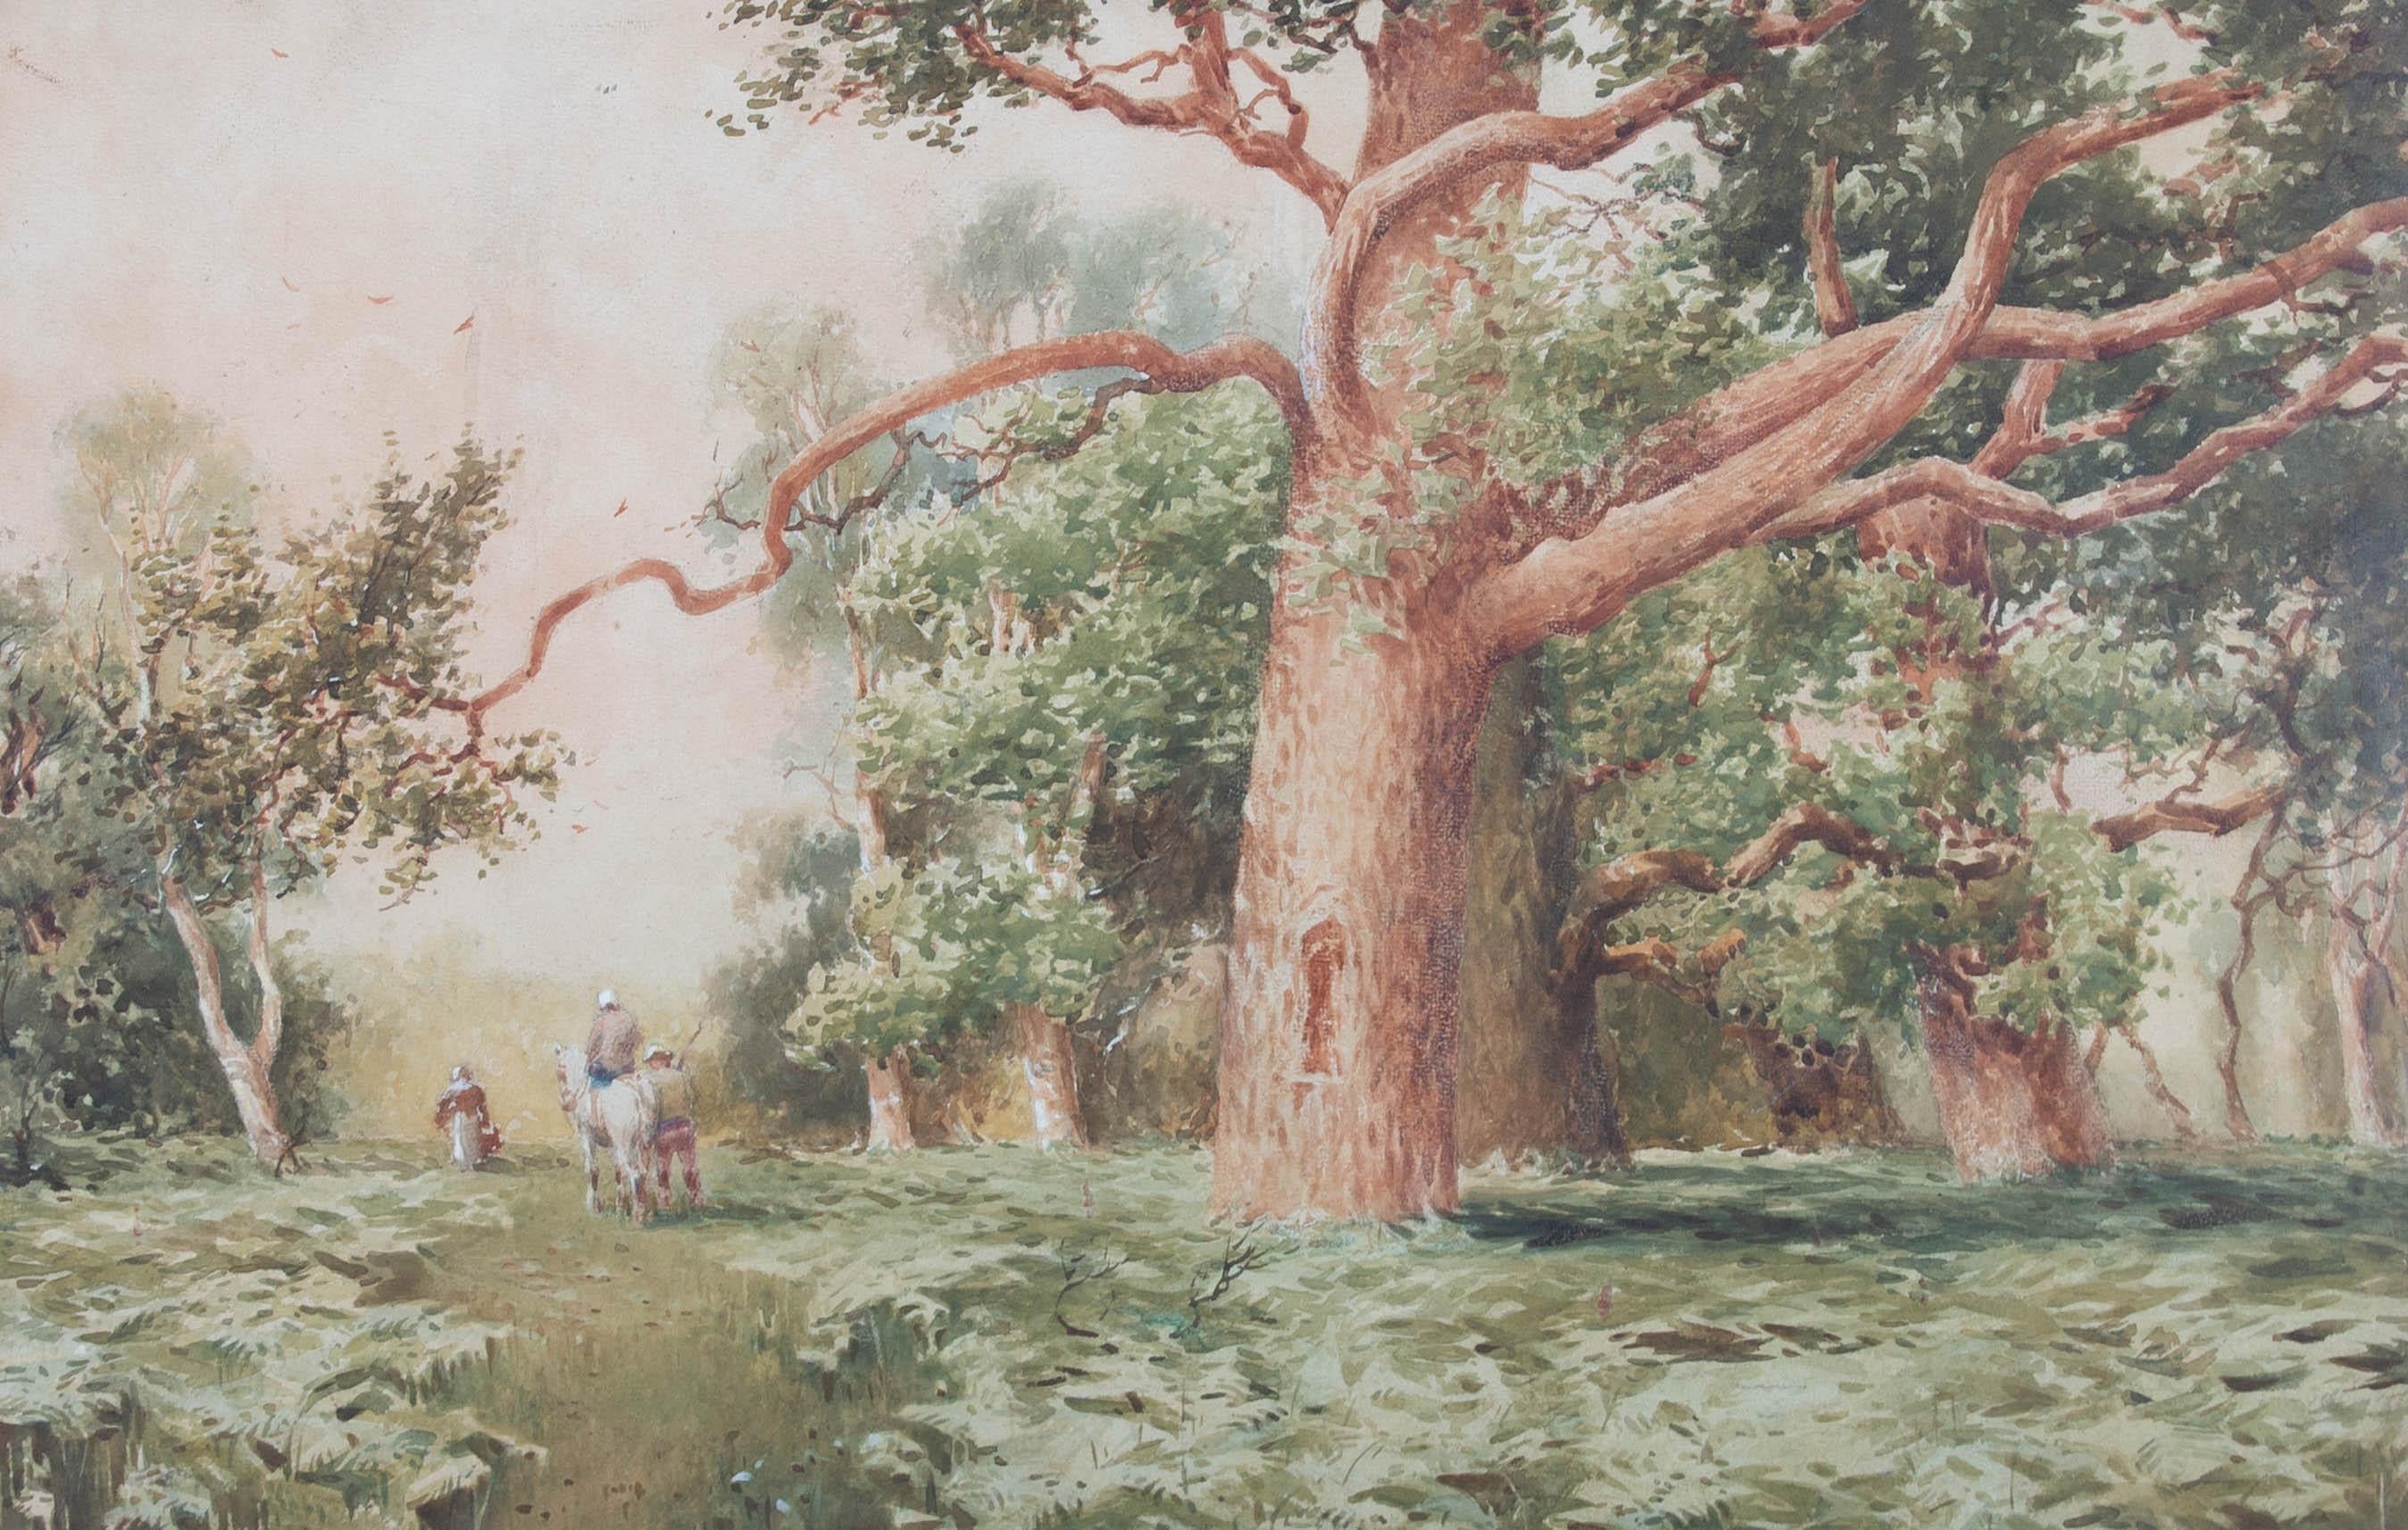 Depicting a woman, man and a figure on a horse making their way down a beaten forest track. Large oak trees dominate the composition, shadowing the forest floor with large, leafy branches. Signed to the lower right. Well presented on a green mount